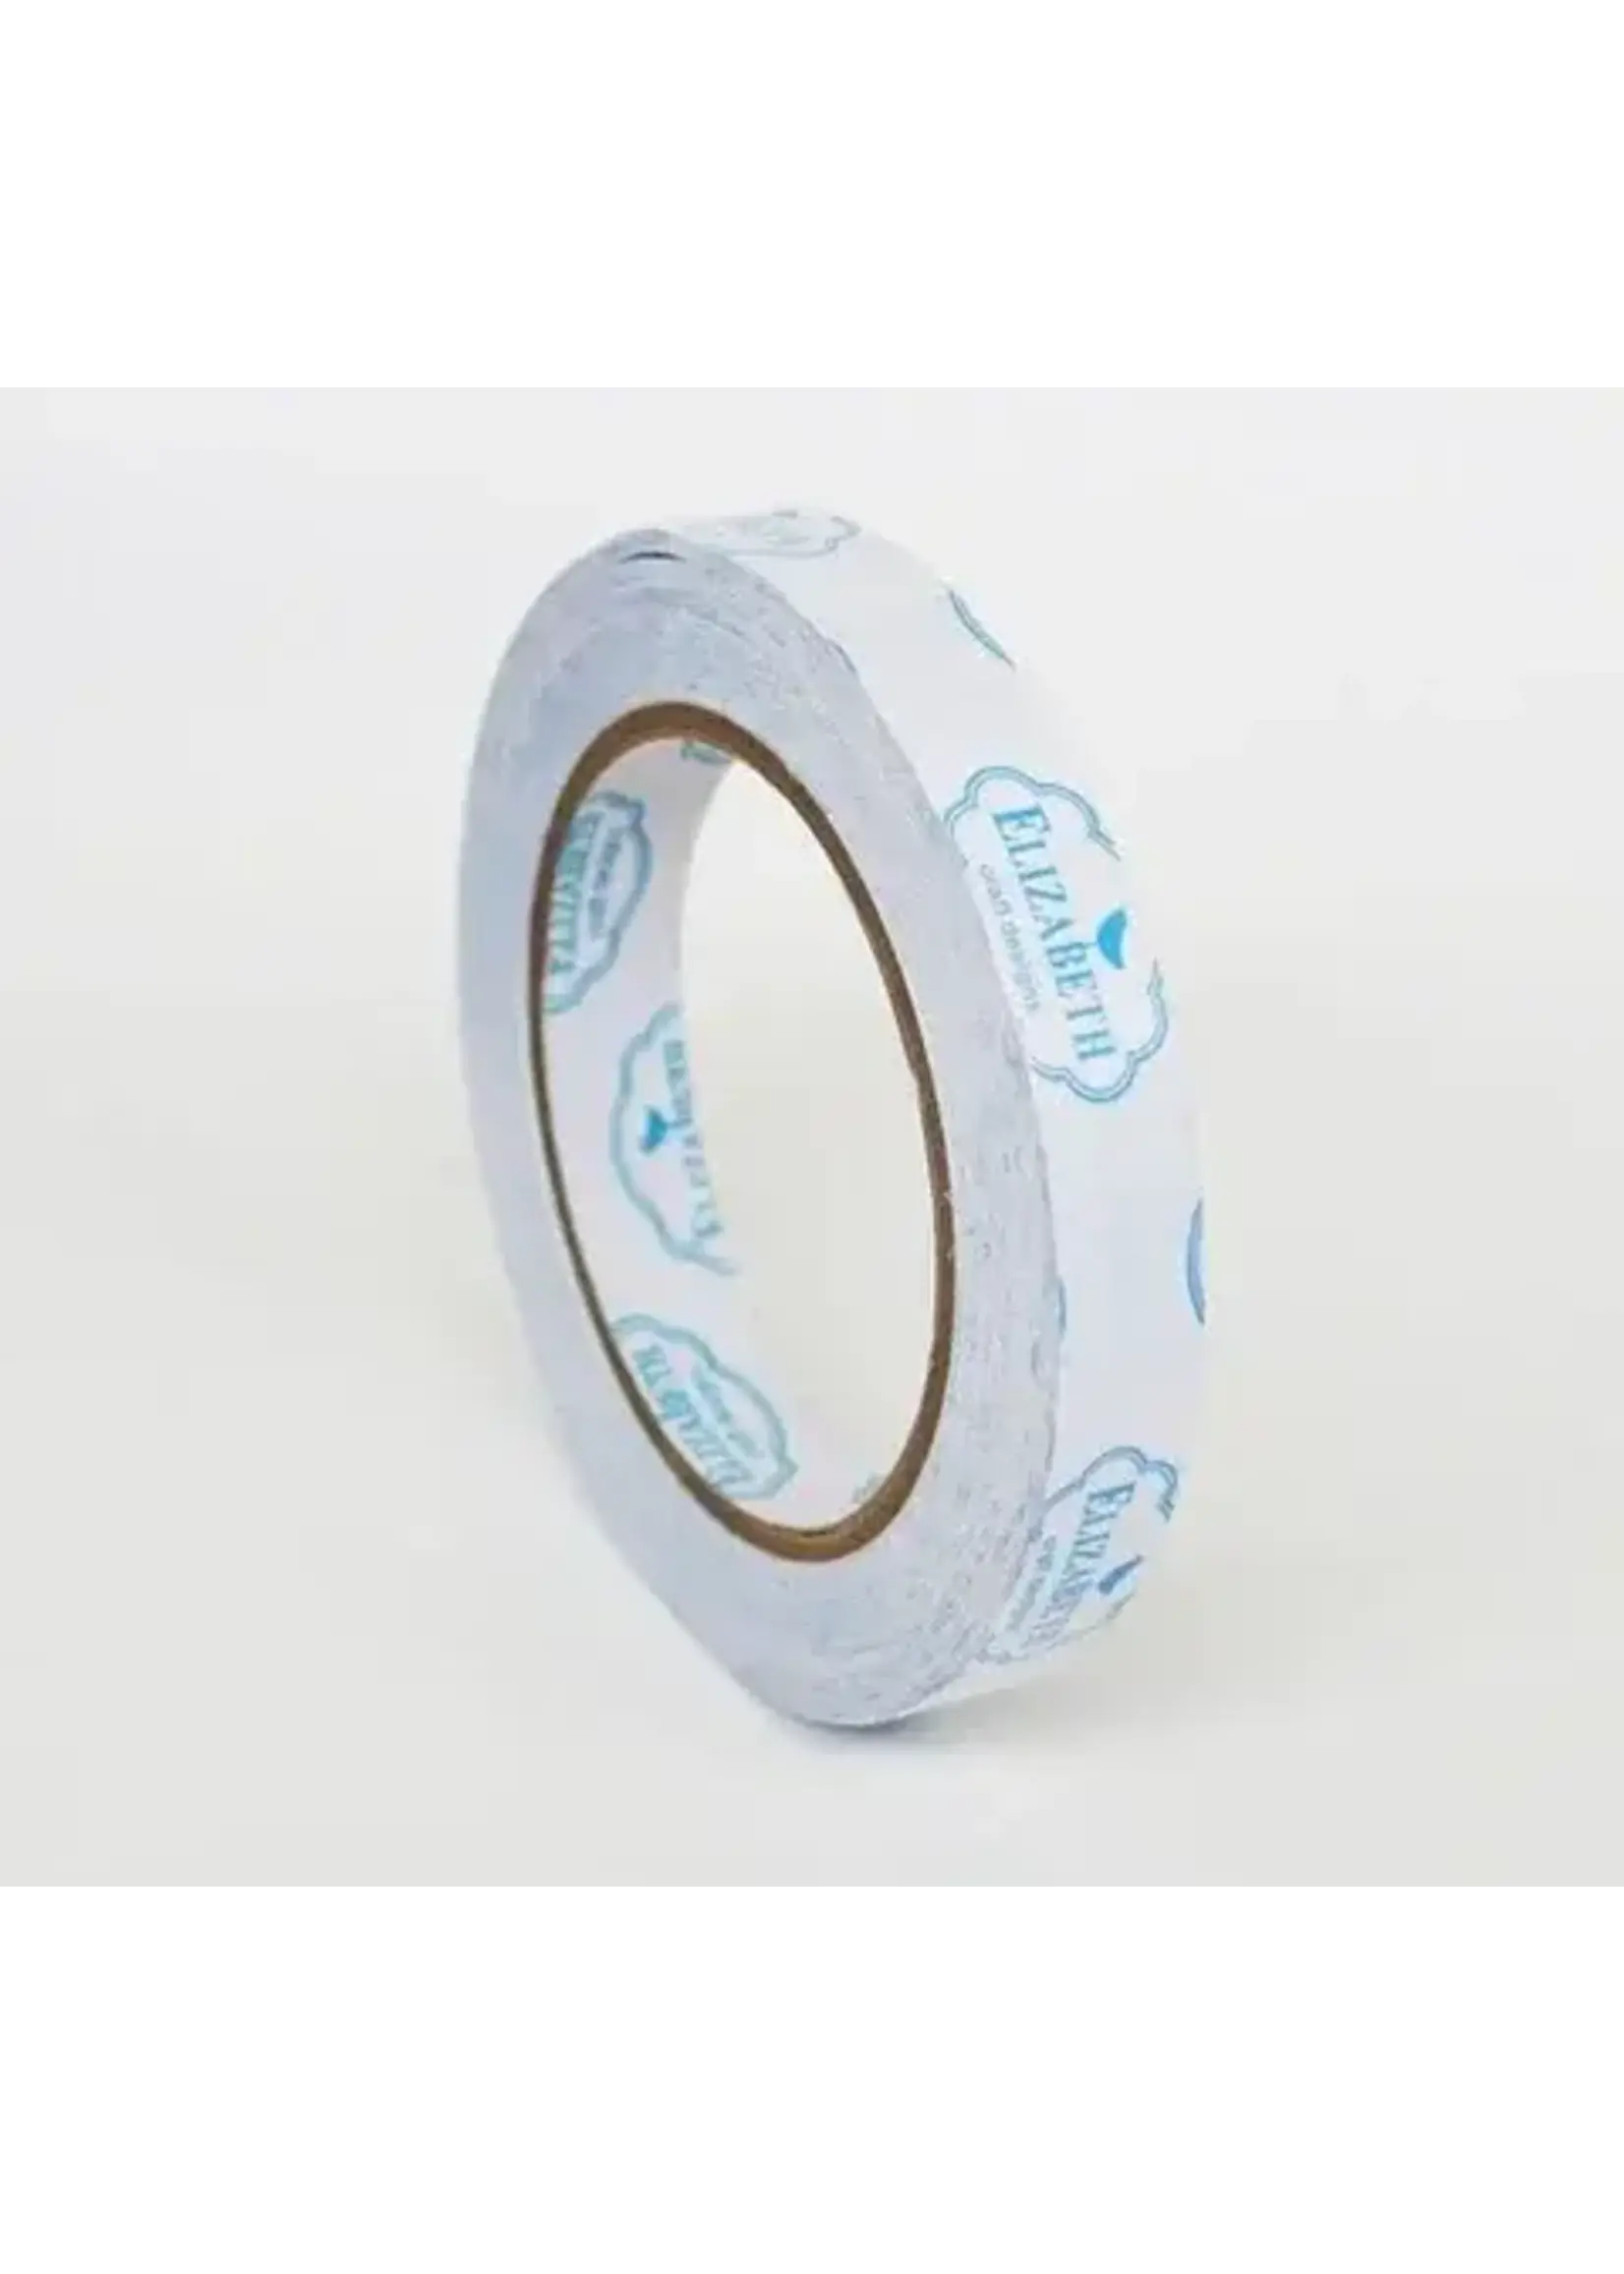 ECD Clear Double Sided Adhesive Tape 15mm x 5/8 Inch (511)